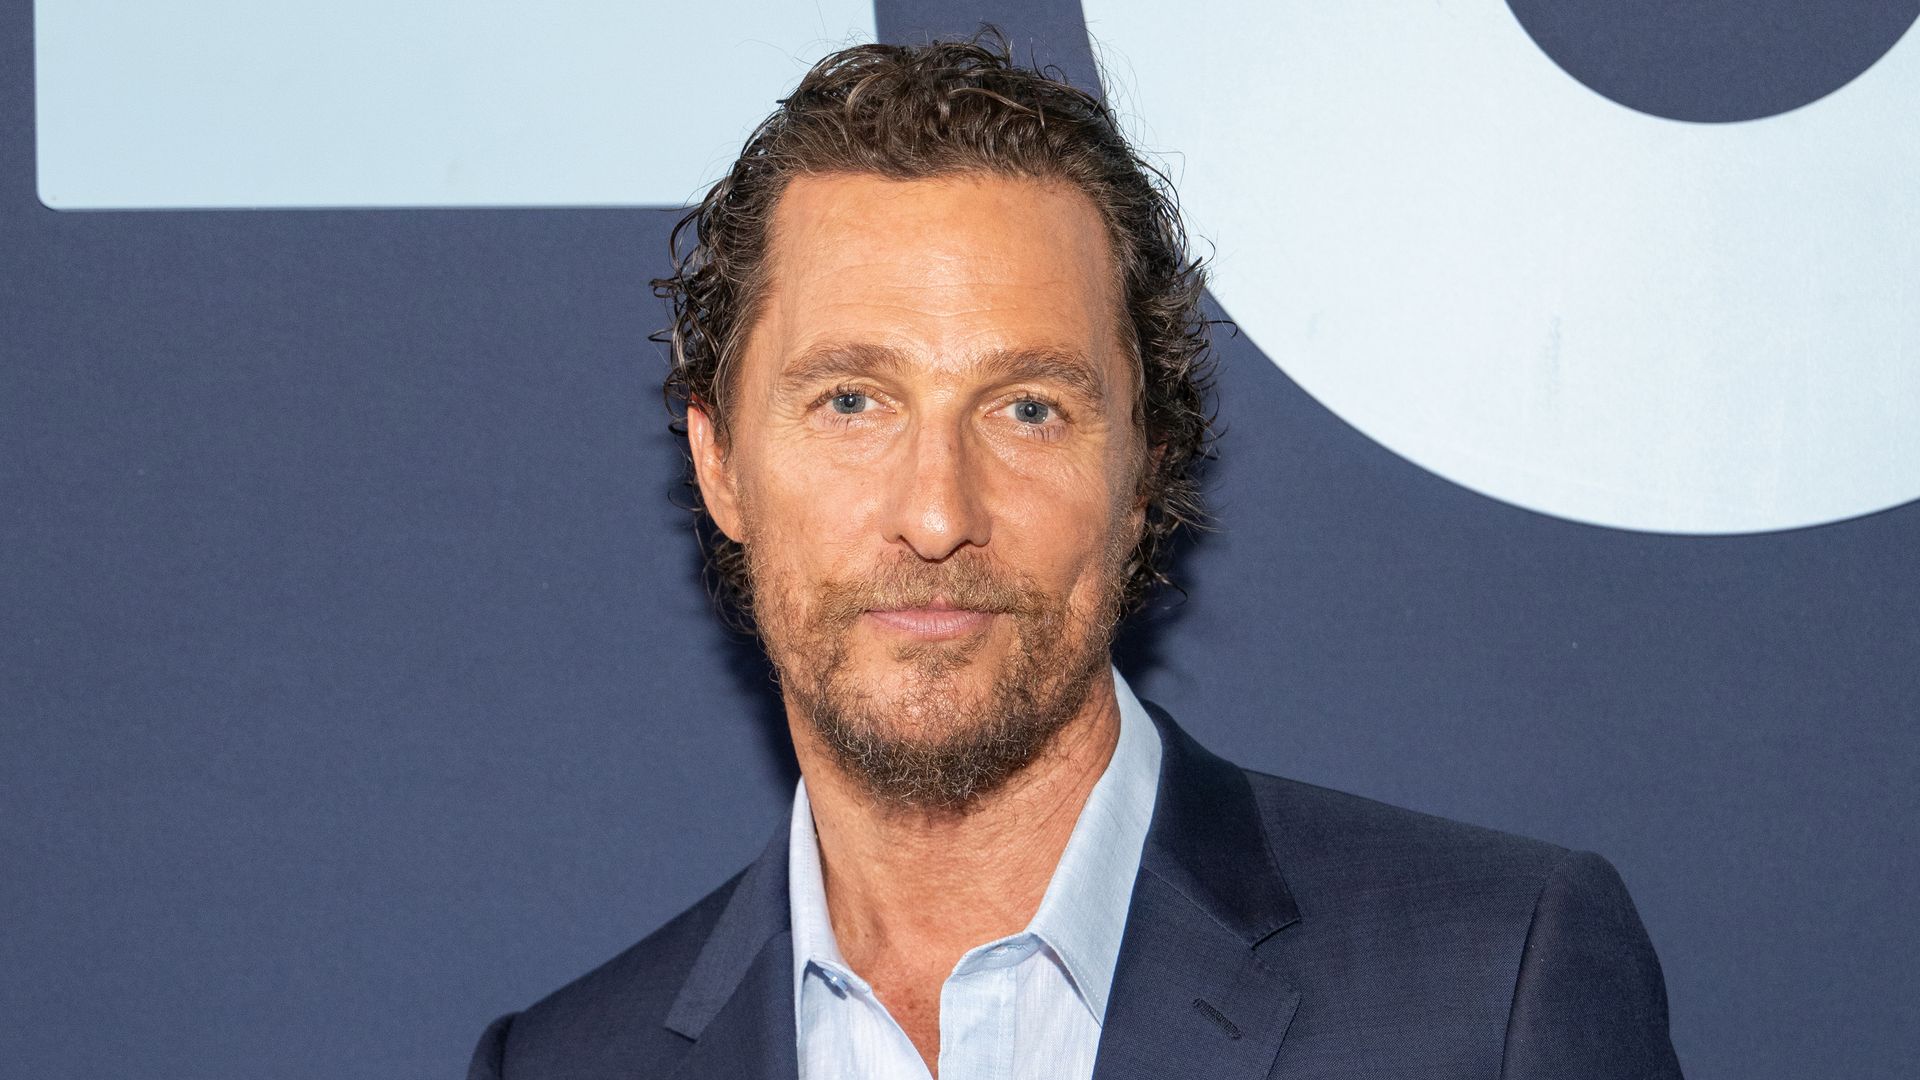 Matthew McConaughey's son Levi, 15, is his dad's double with matching curls